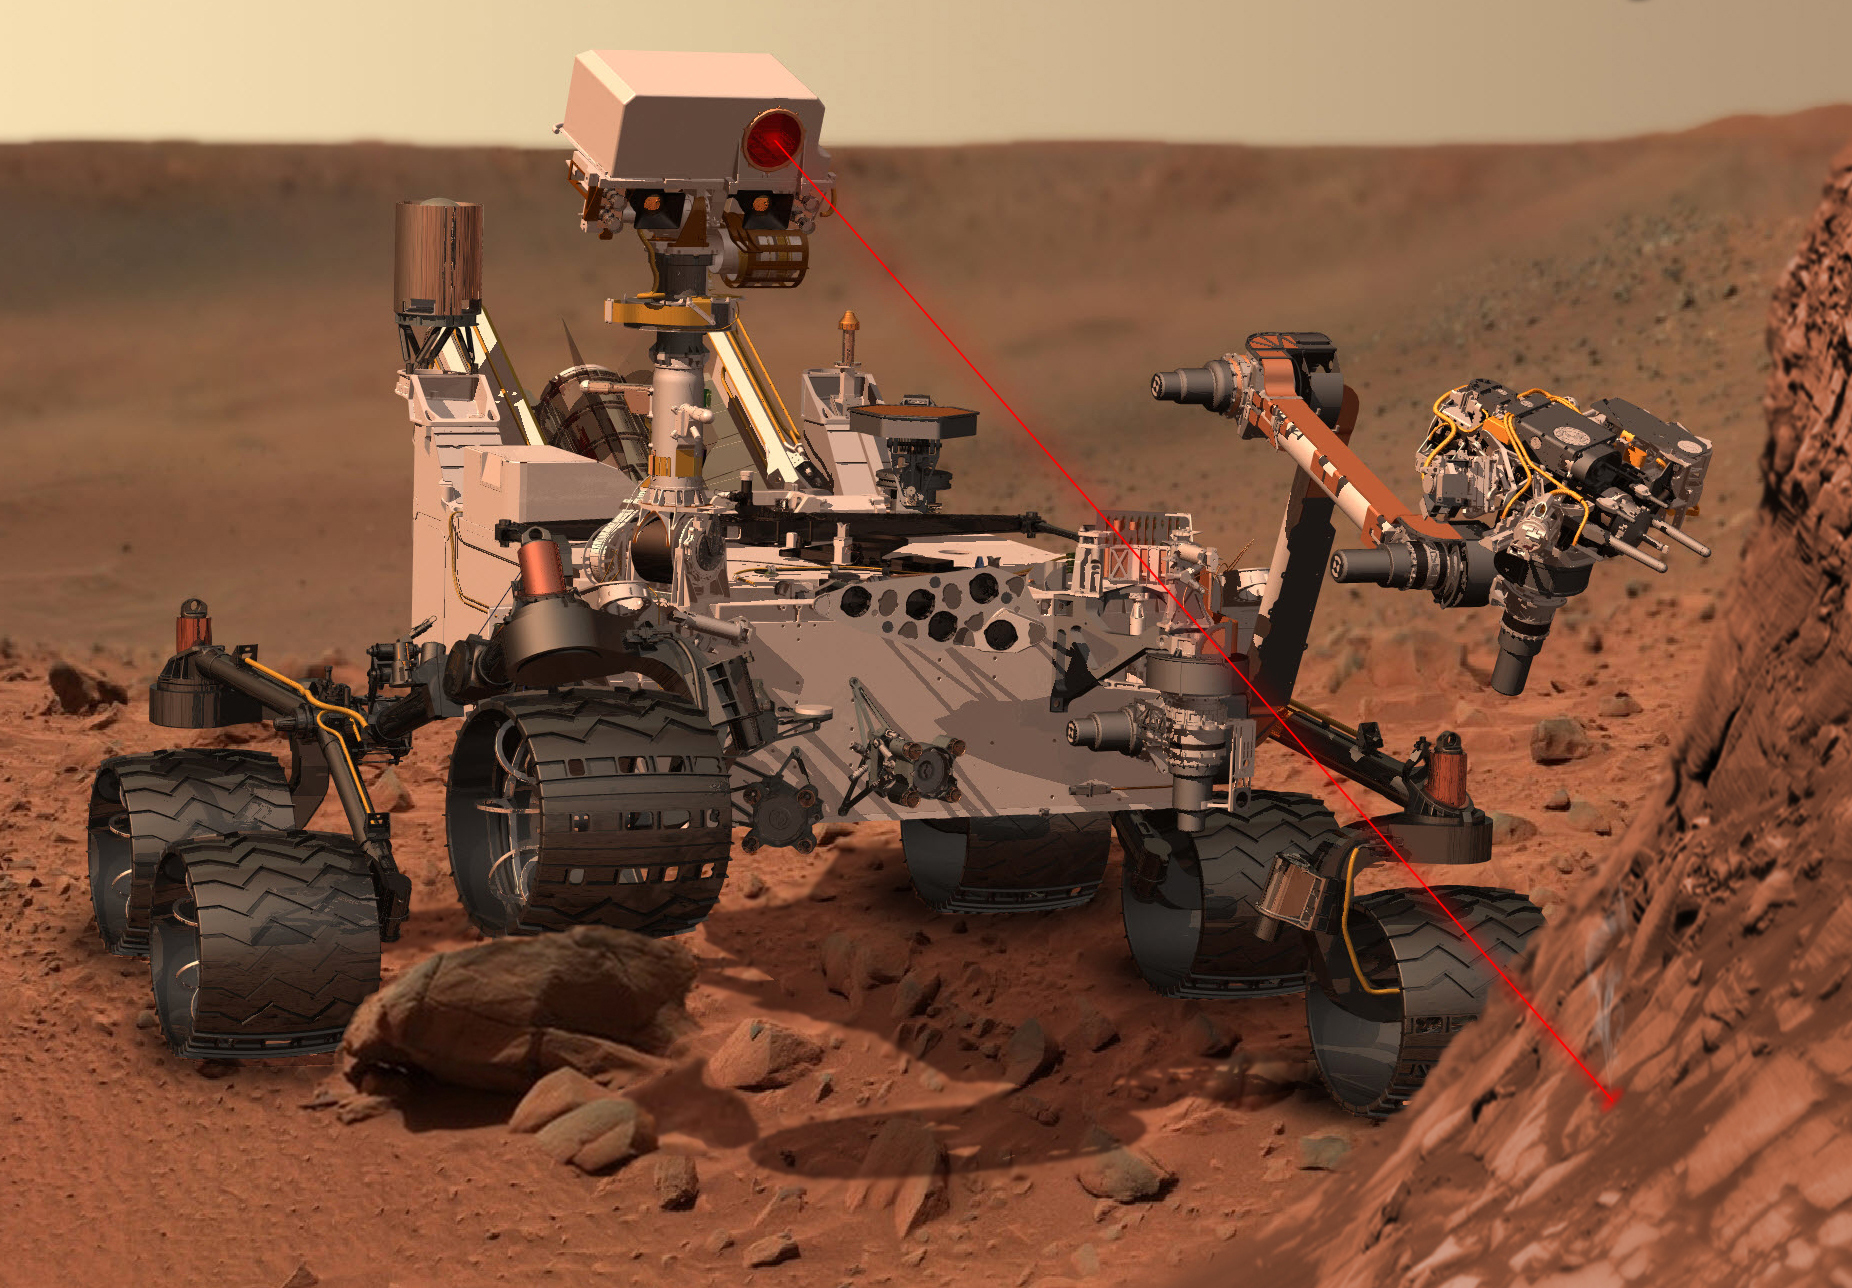 Bearings from GGB Bearing Technology Critical to NASA's Curiosity Mission